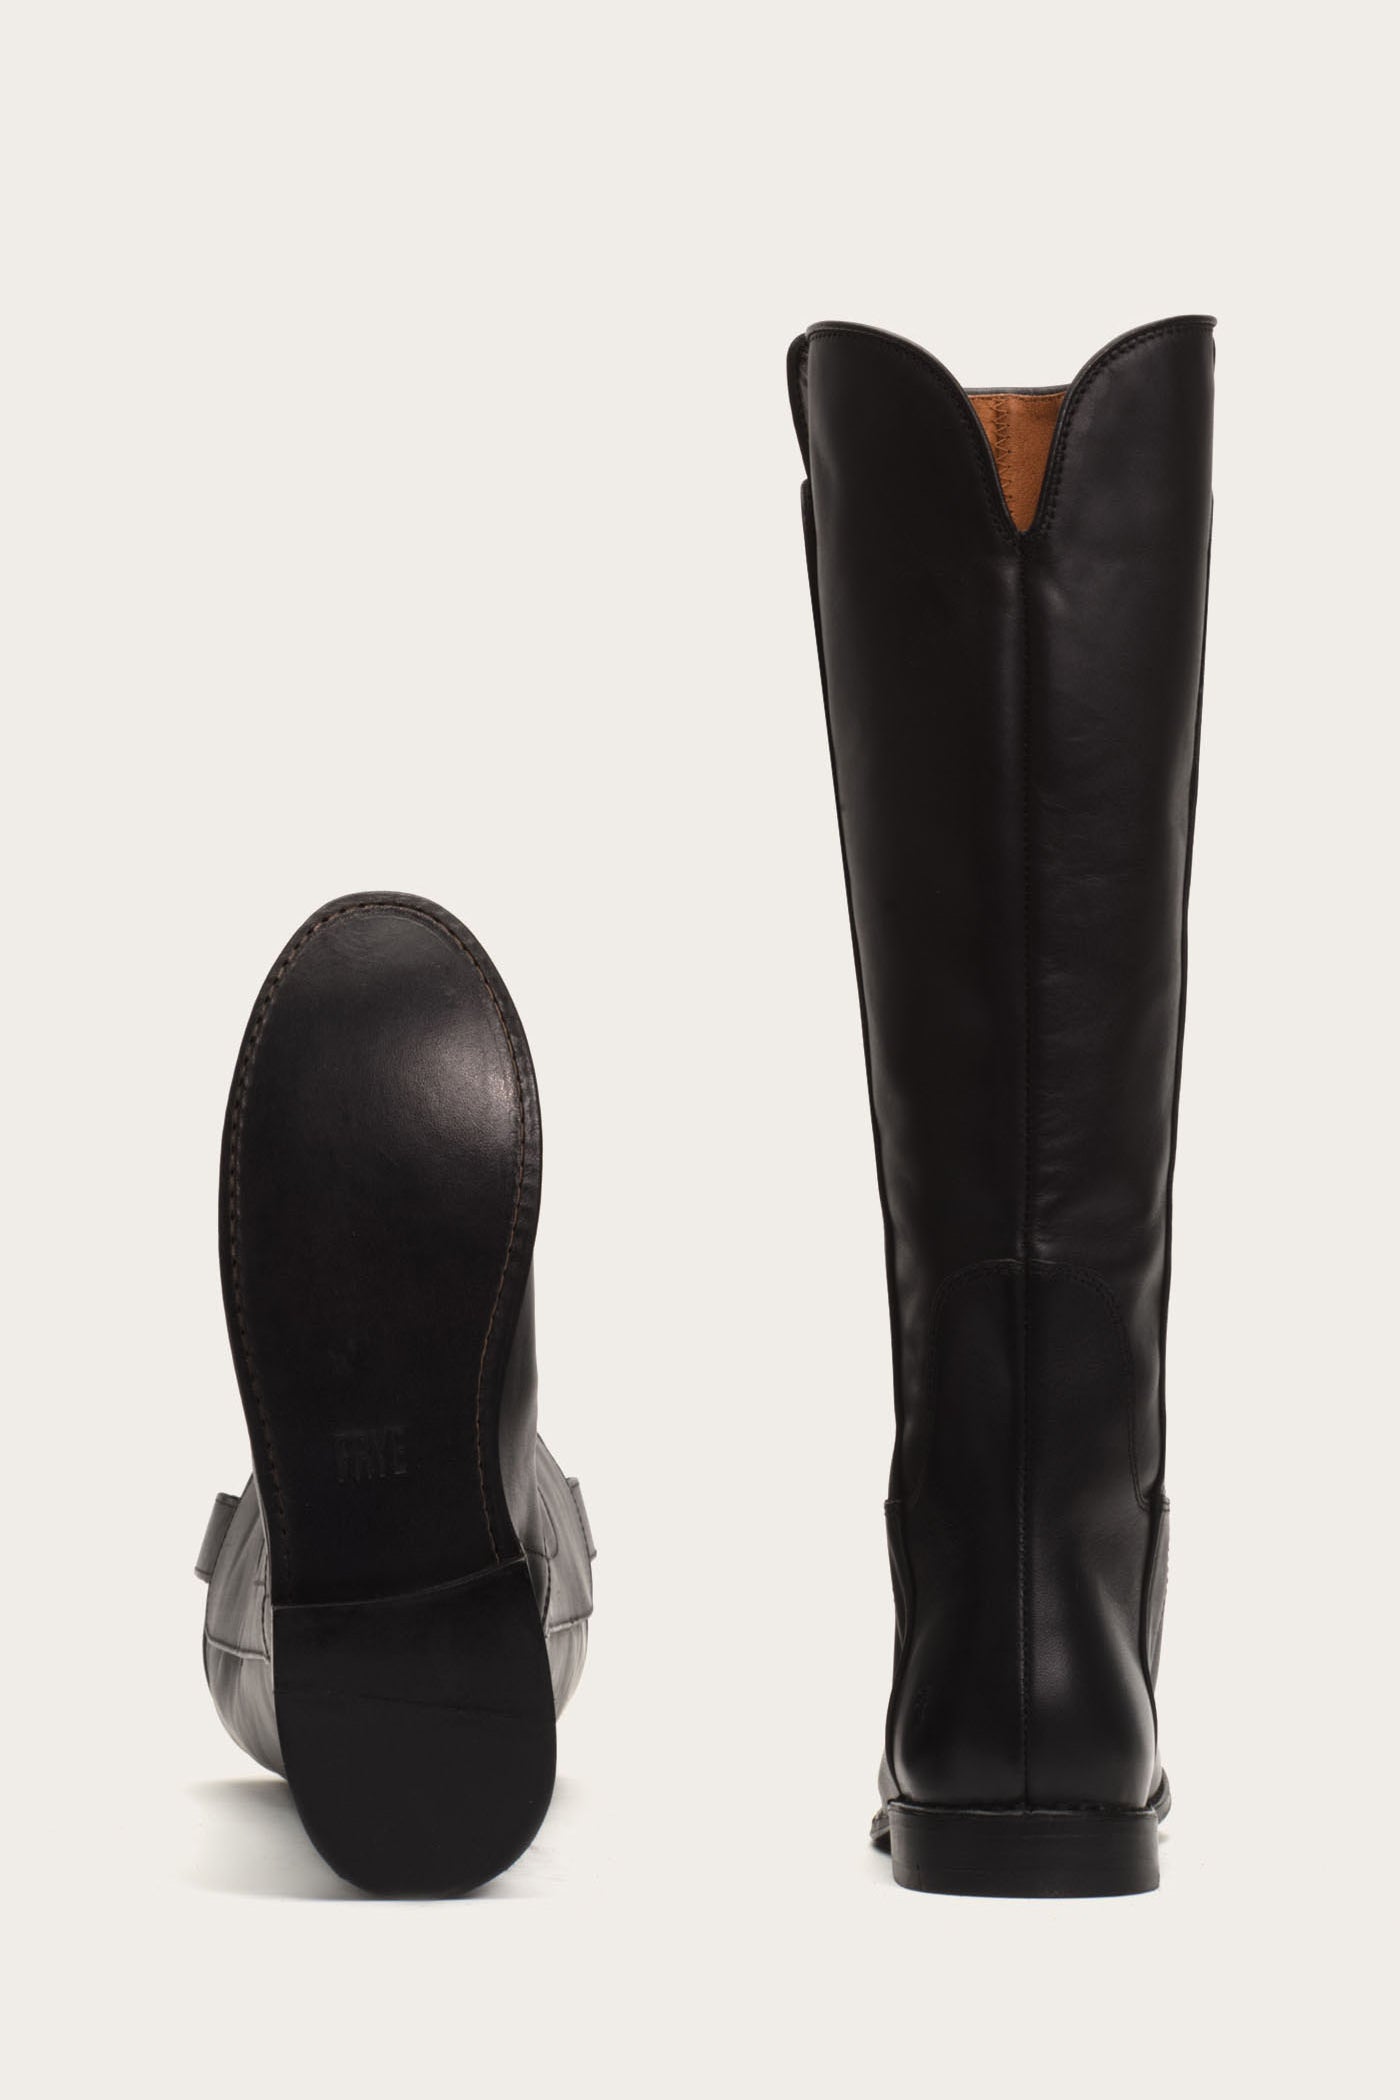 frye paige tall riding boot slate